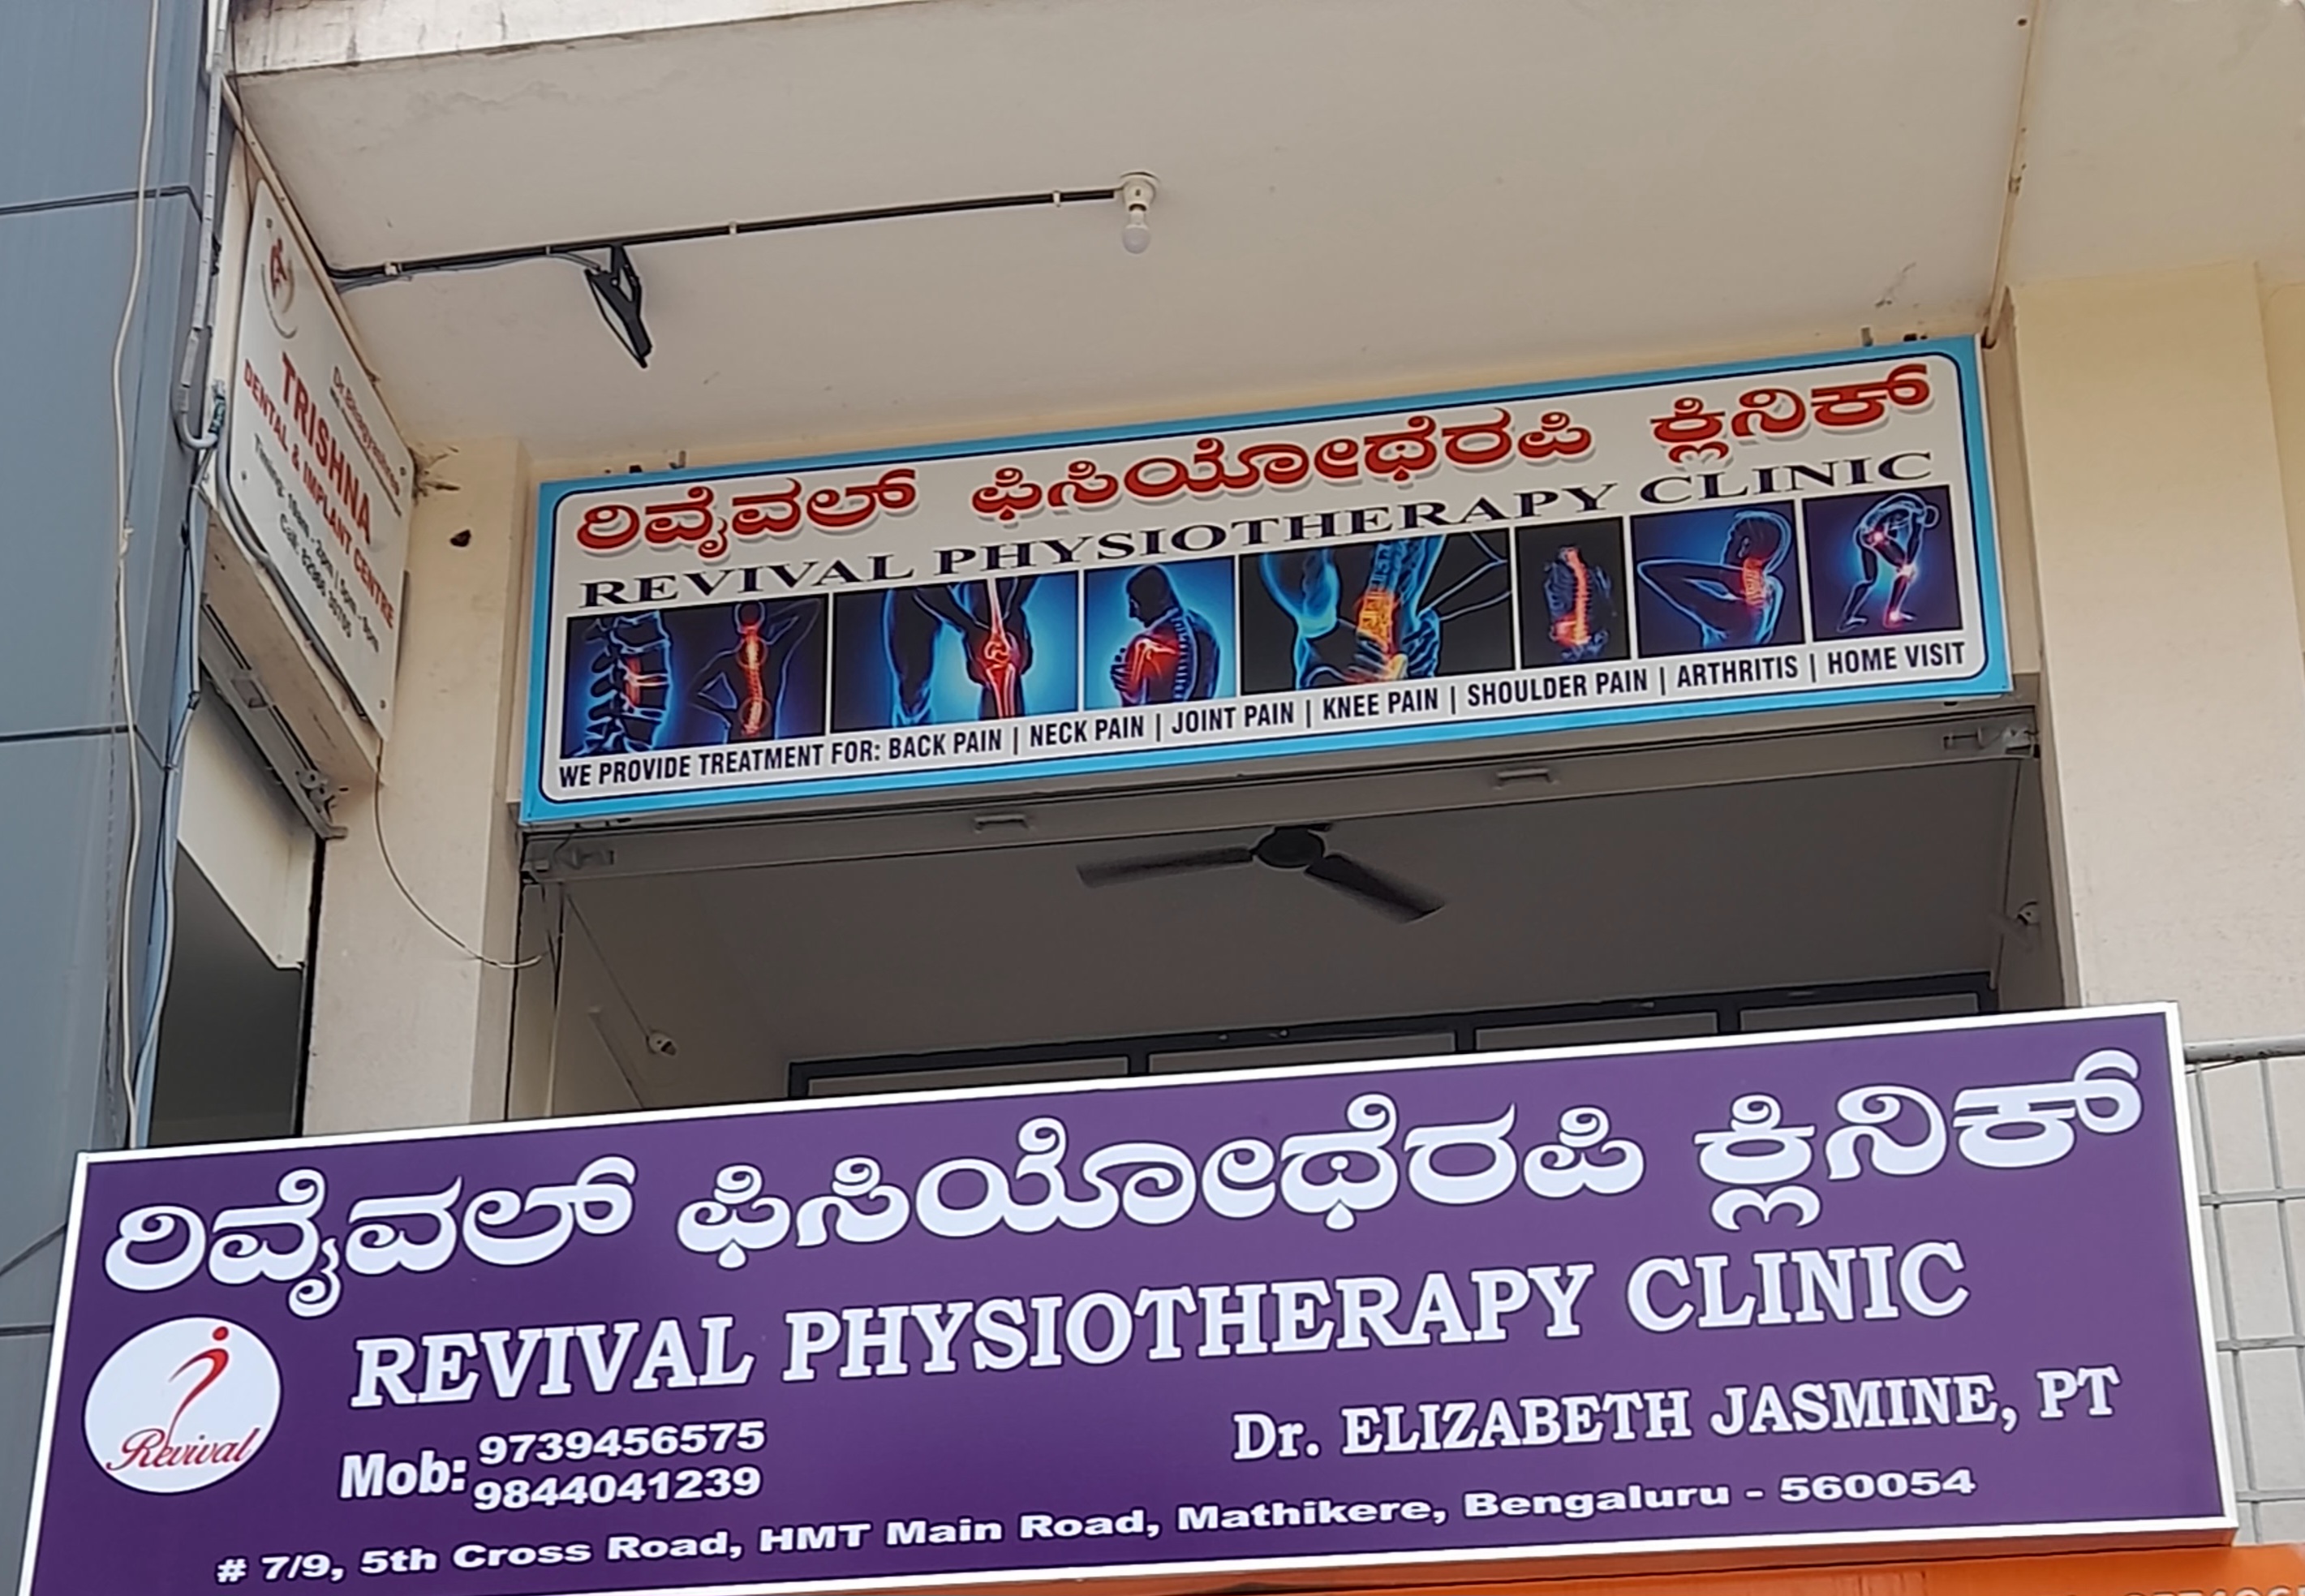 REVIVAL PHYSIOTHERAPY CLINIC  - 345